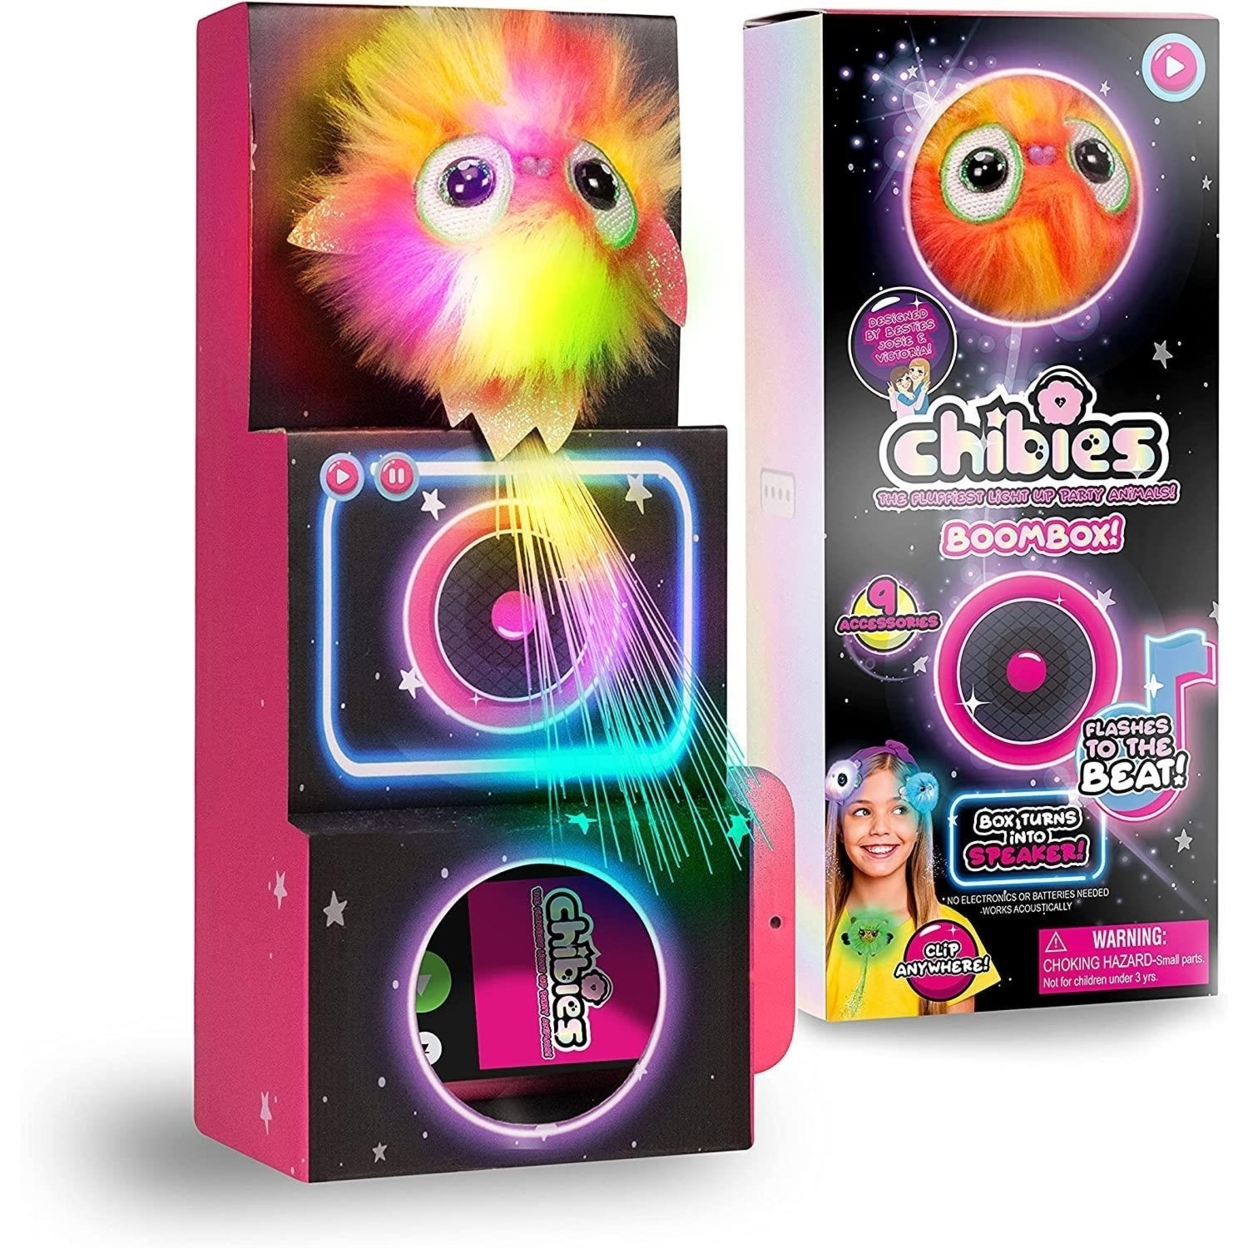 Chibies Boom Box Sparkle Parrot Interactive With Music Glows Lights WOW! Stuff